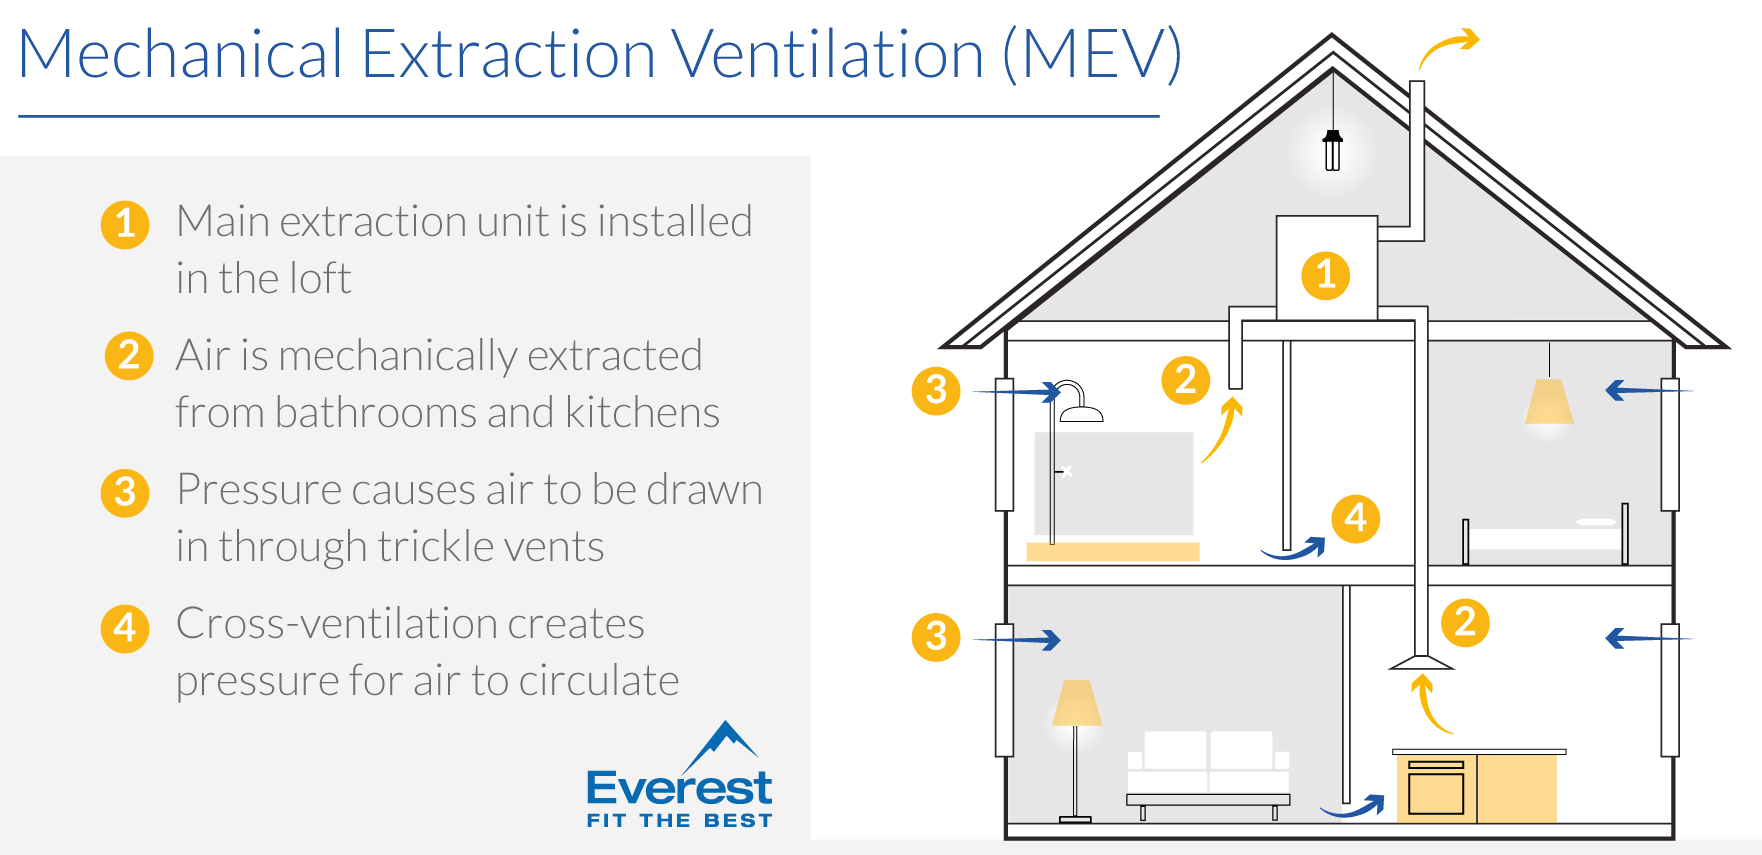 What is Mechanical extract ventilation (MEV)?